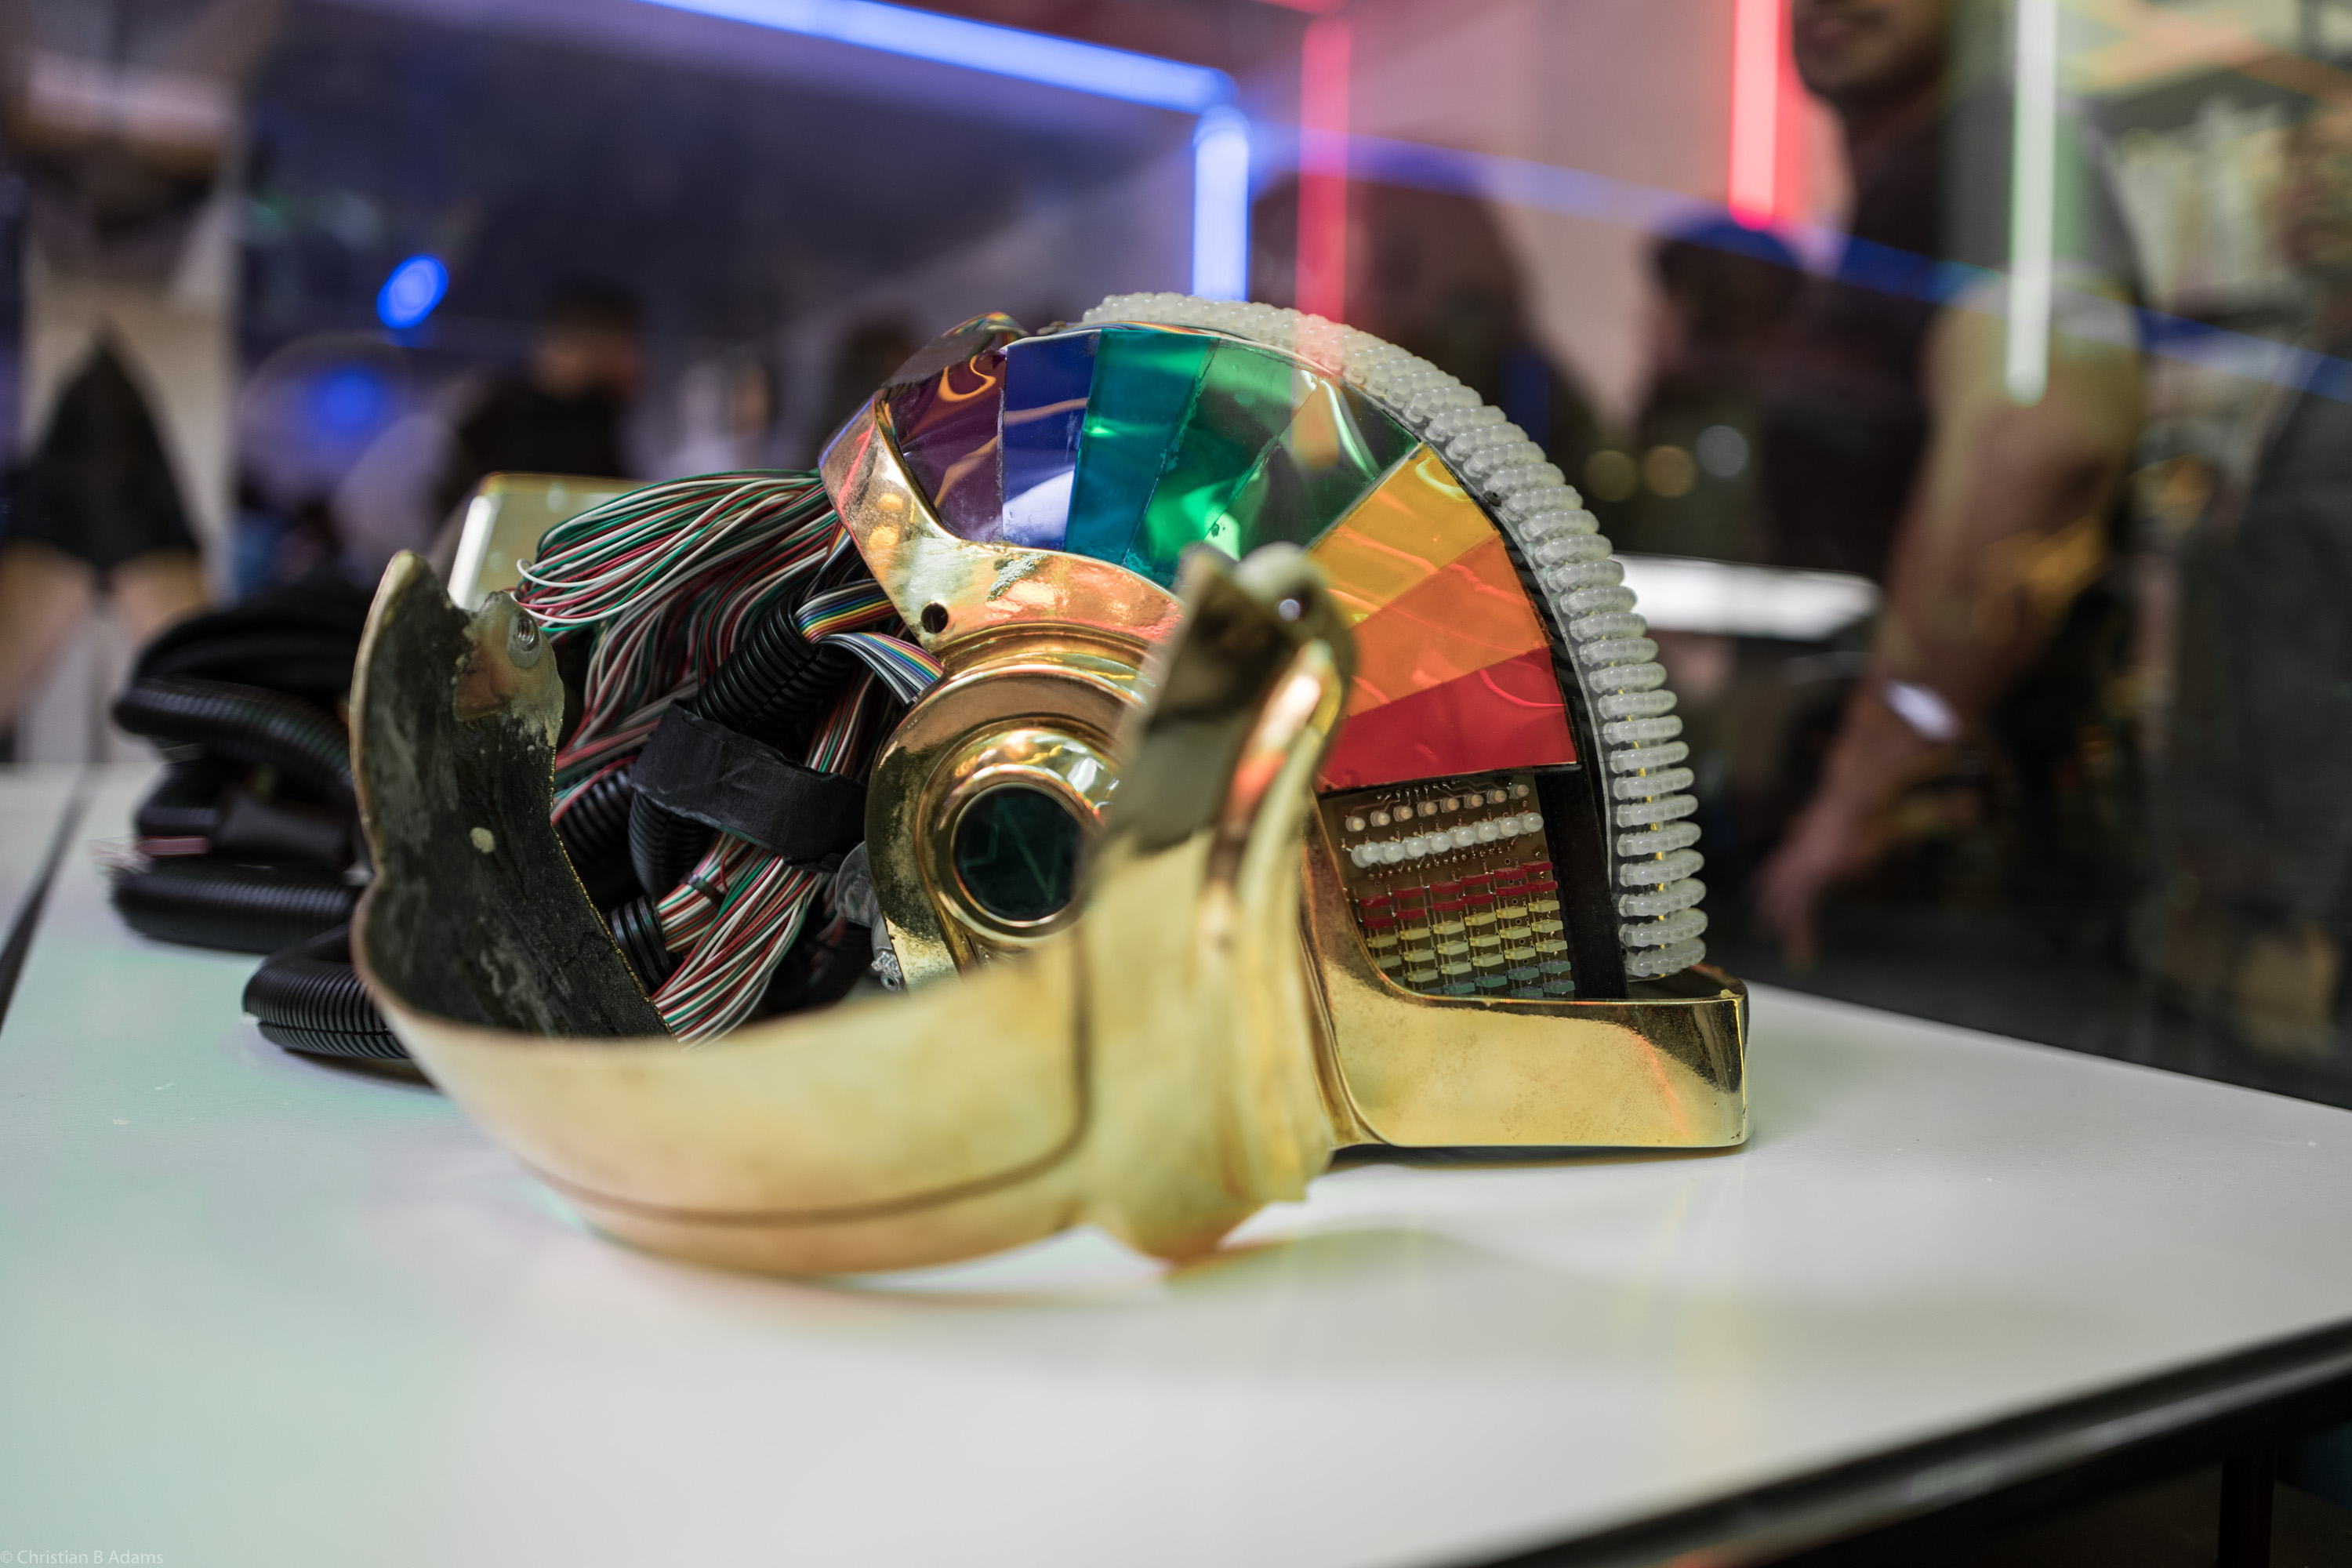 Guy-Manuel de Homem-Christo's Discovery era robot helmet at the Daft Punk Pop Up at Maxfield Gallery Los Angeles in February of 2017.